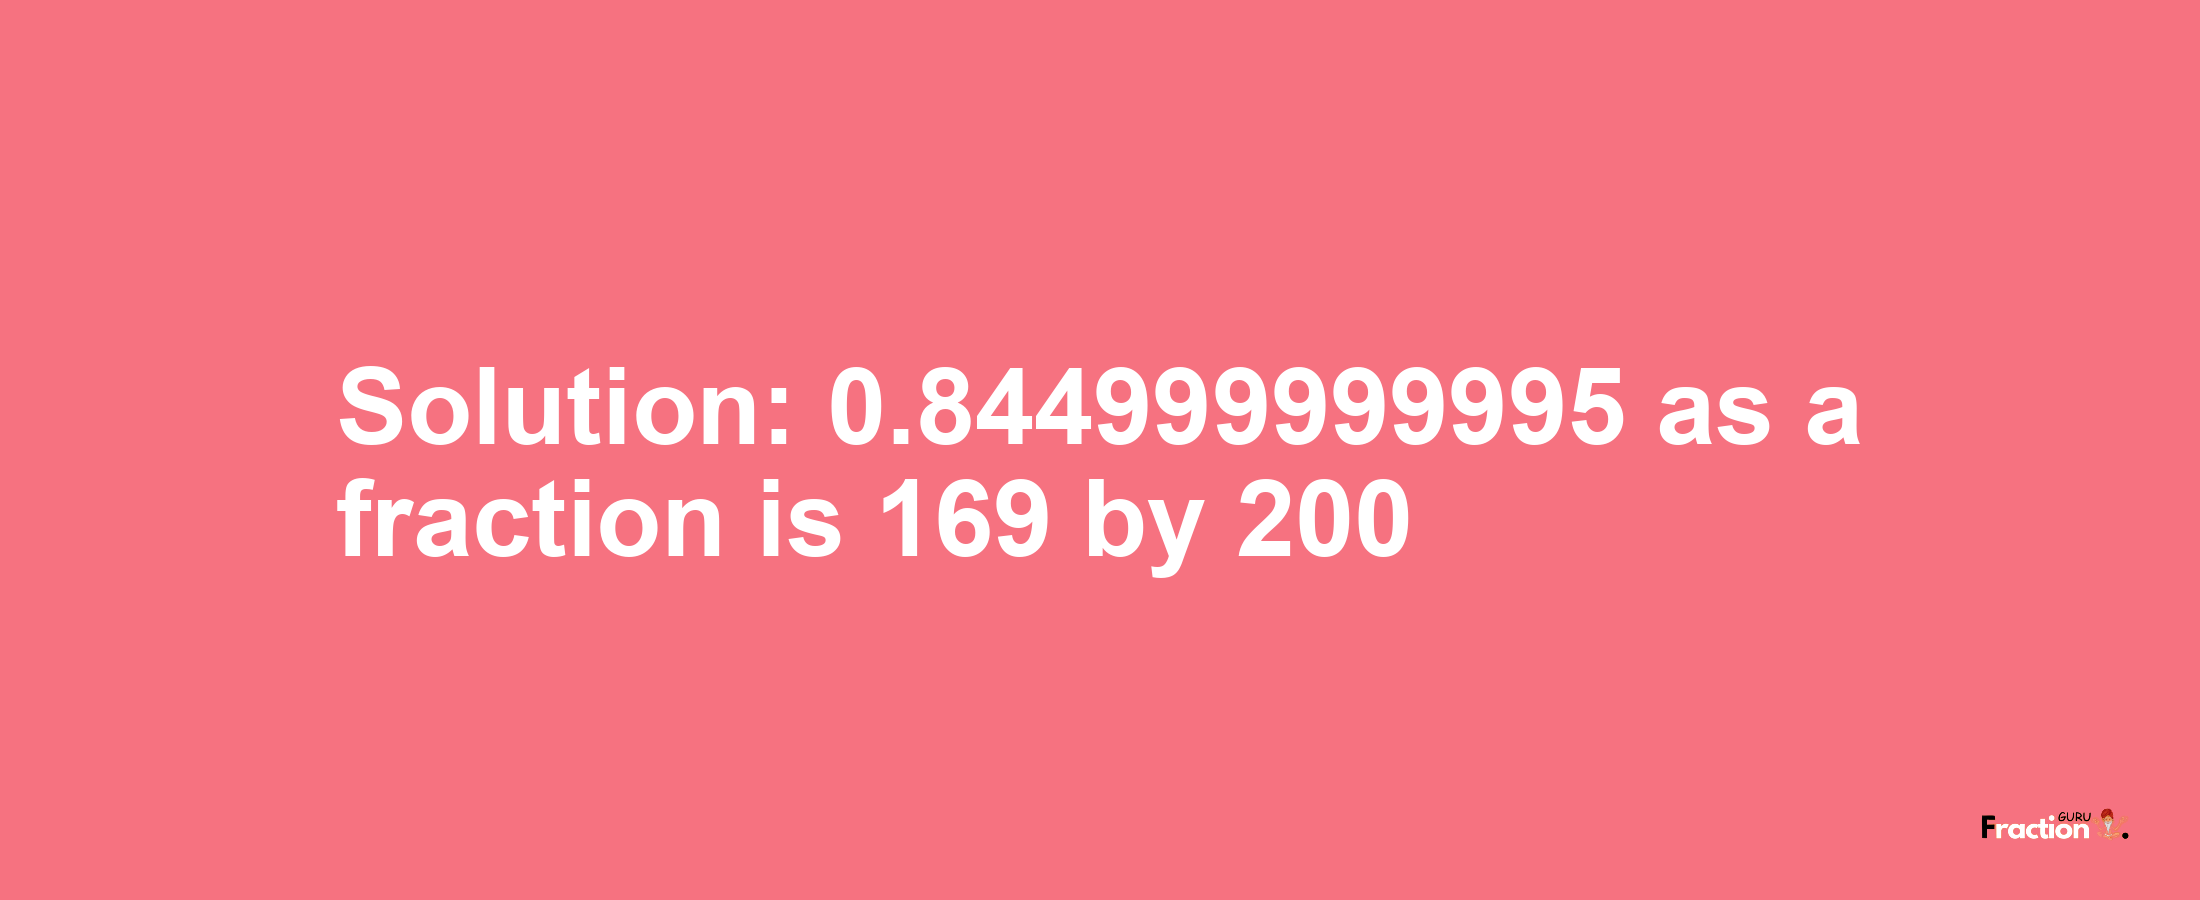 Solution:0.844999999995 as a fraction is 169/200